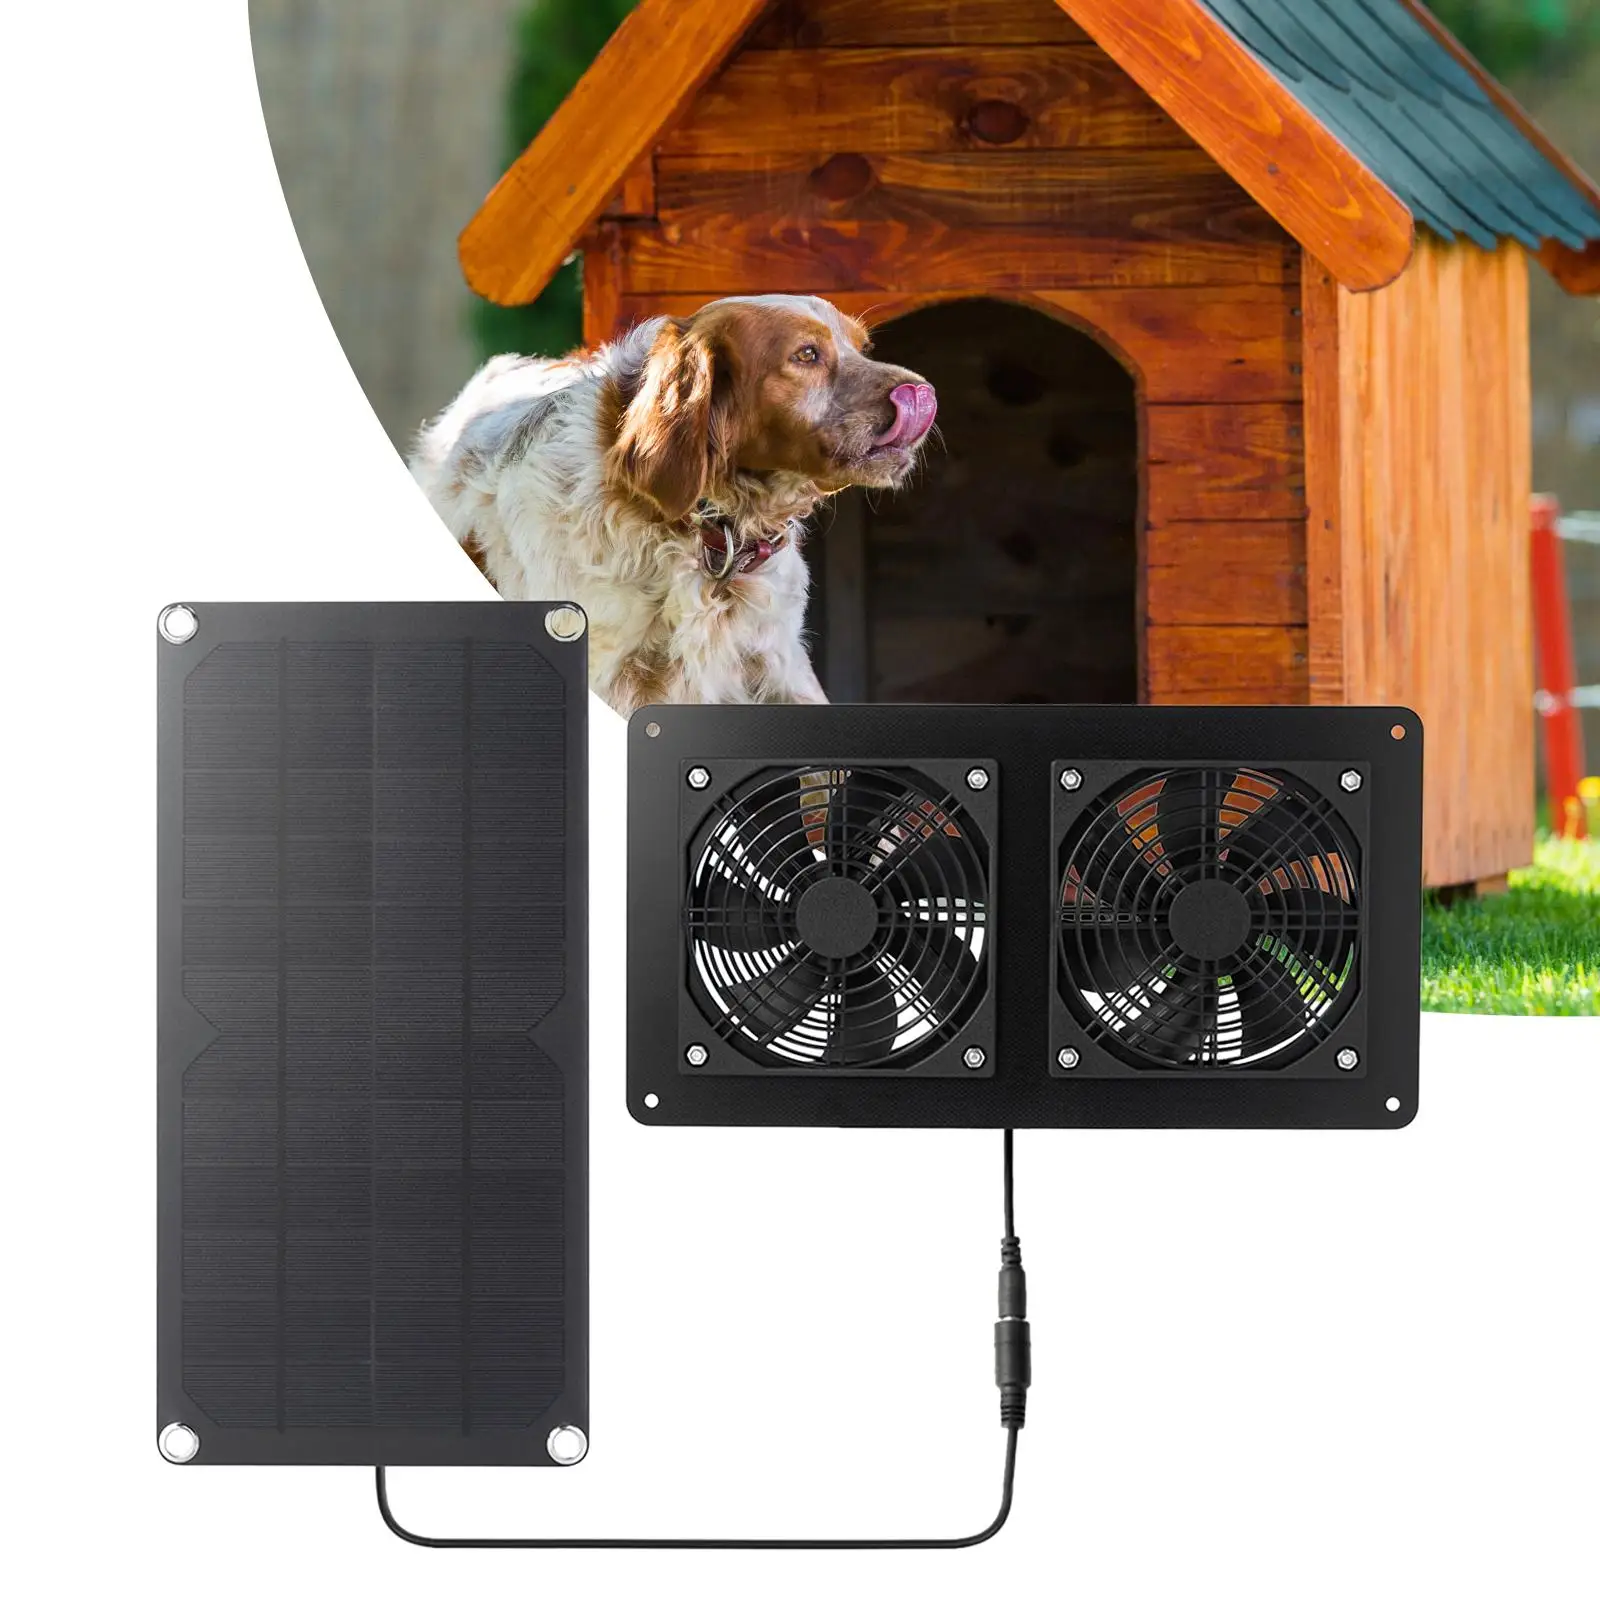 10W 12V Solar Panel Exhaust Fan Set with 150cm Cable Solar Exhaust Fan for Camping Exhaust Outside Chicken Coops Shed Dog House